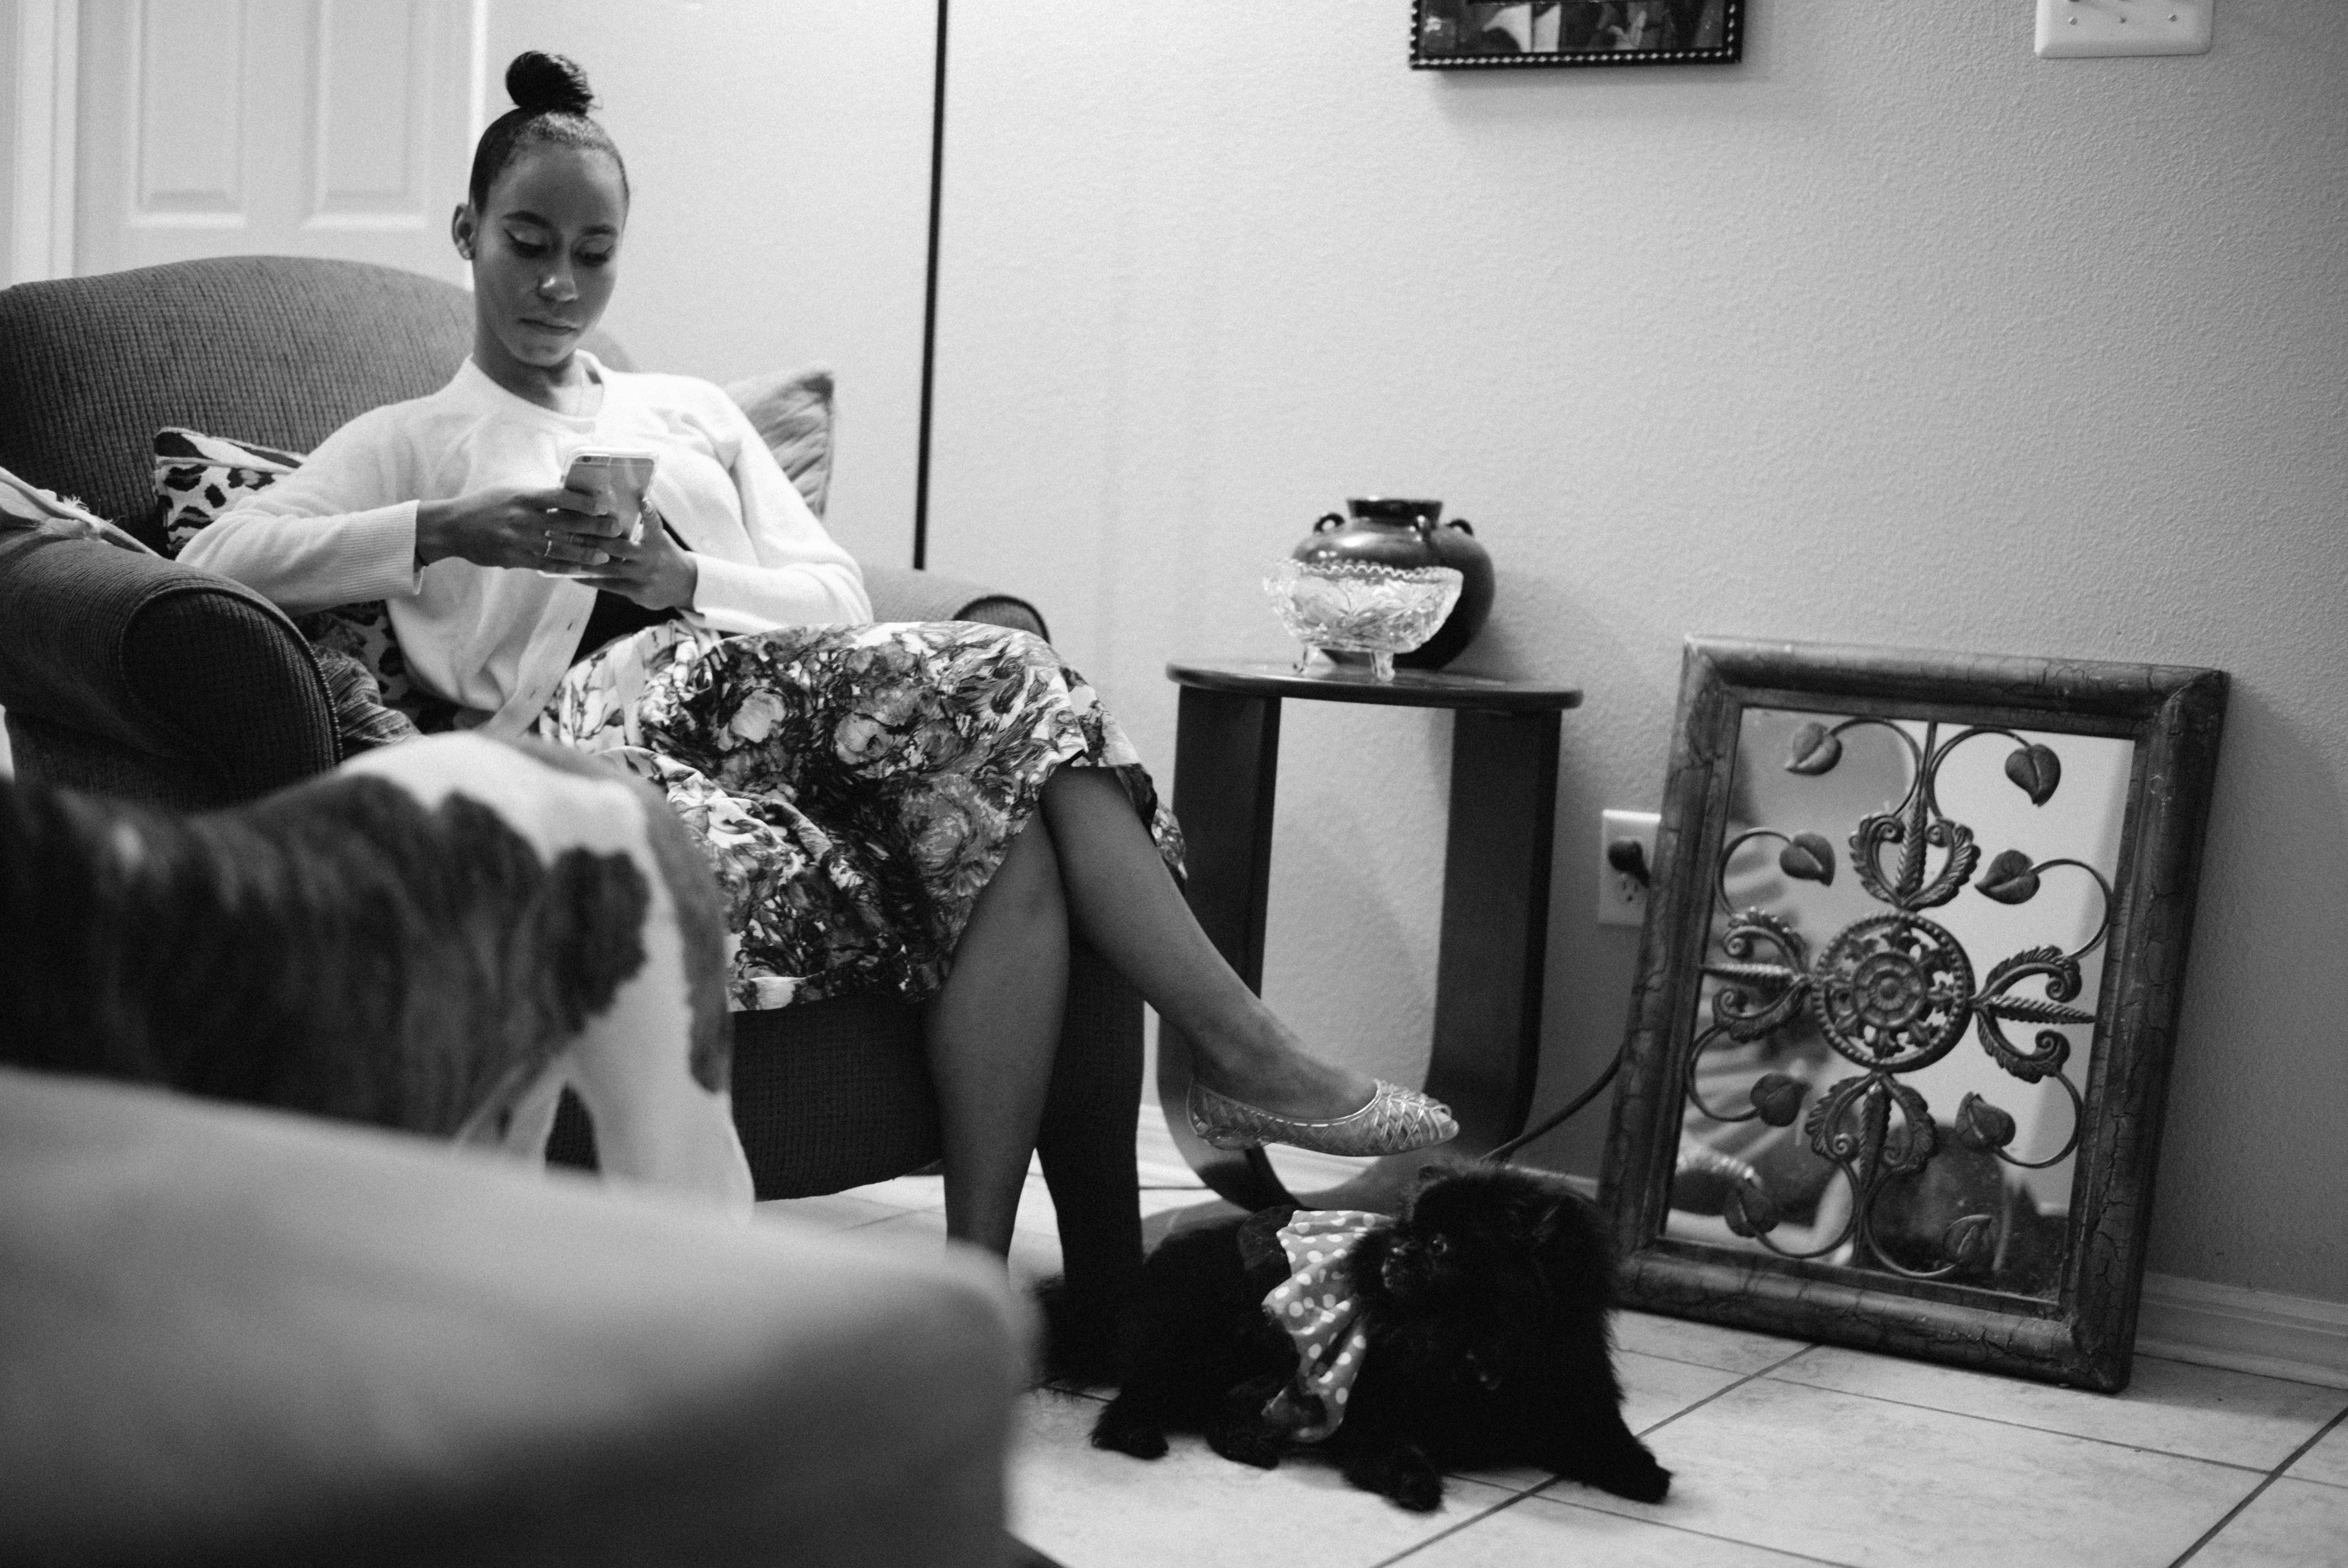 My daughter Alfre, her pomeranian Foxxy (with a skirt on) and my sister's American Bull Dog, Apollo. Leica M-P / Summilux 50mm @ f1.7, 1/125, ISO 800 DNG with Leica M Tri-X profile applied before JPEG conversion